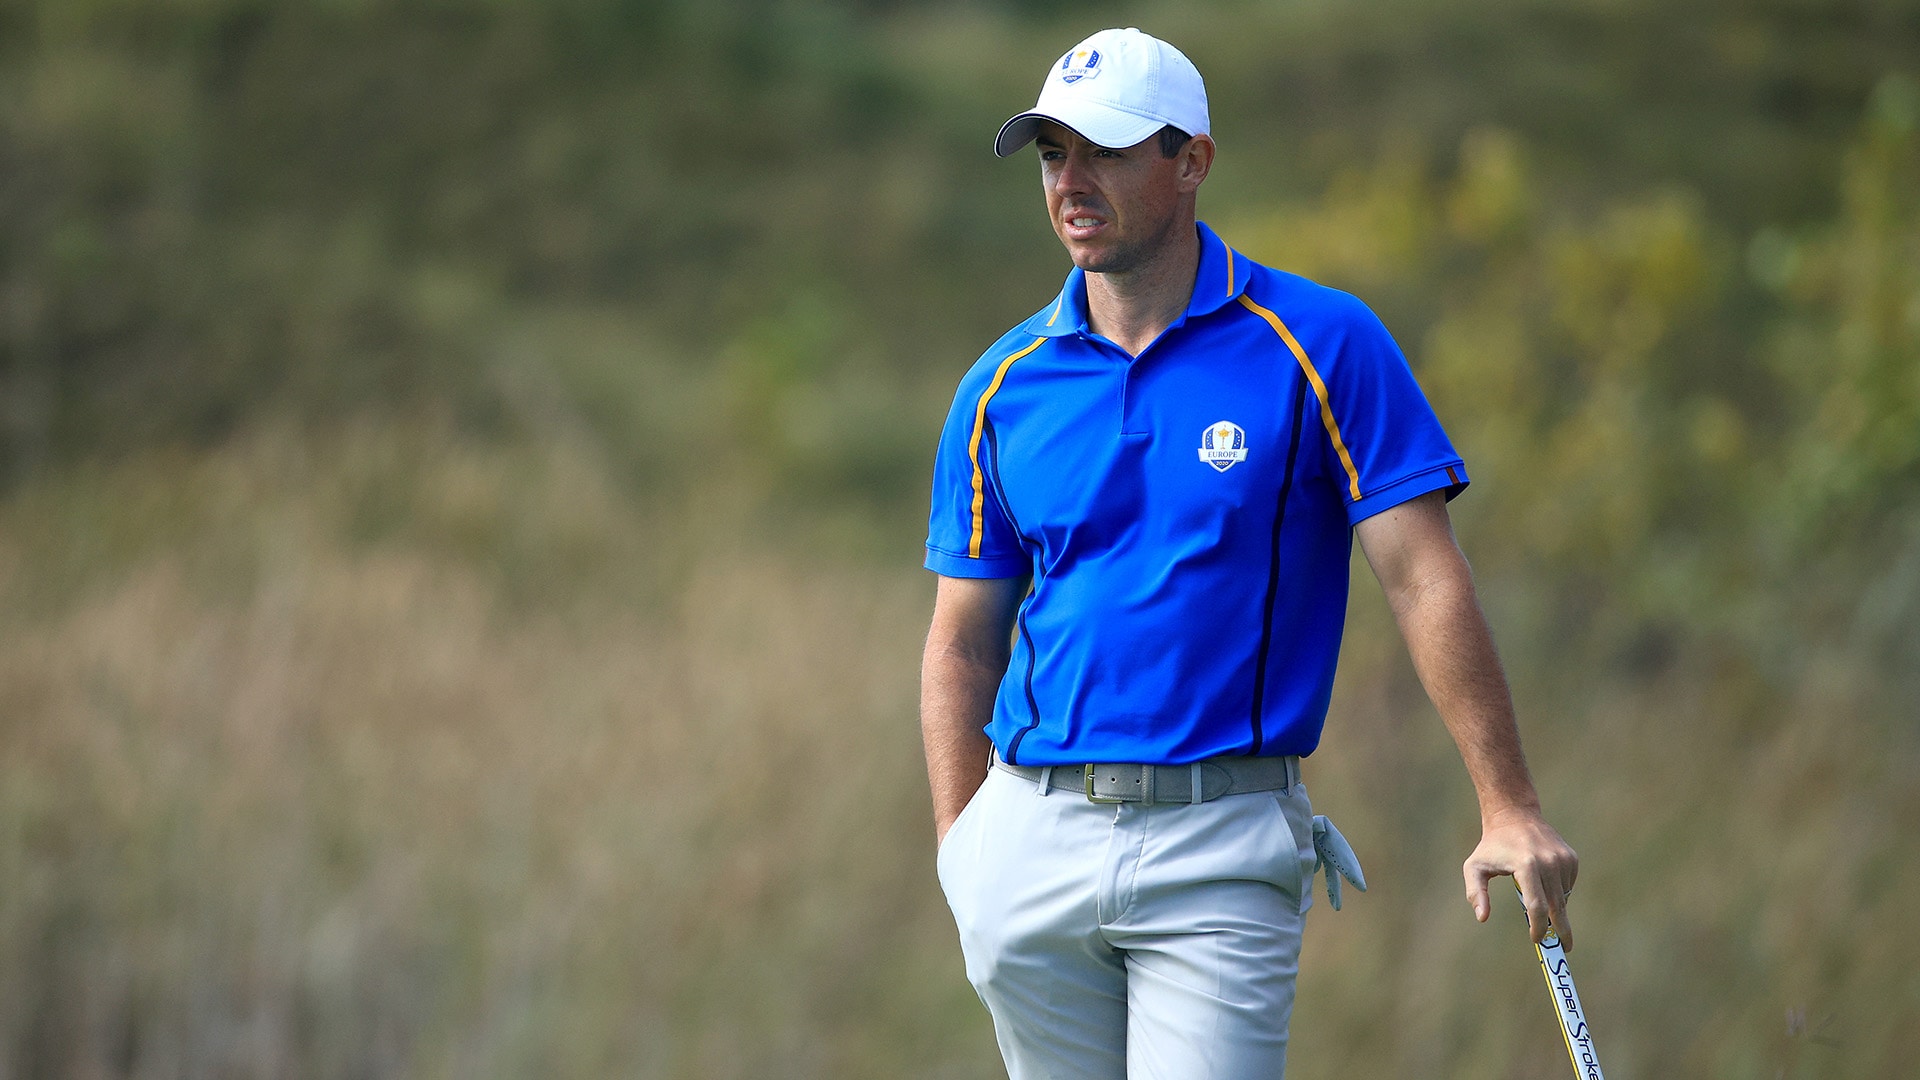 Rory McIlroy says Brooks Koepka only LIV player deserving of Ryder Cup